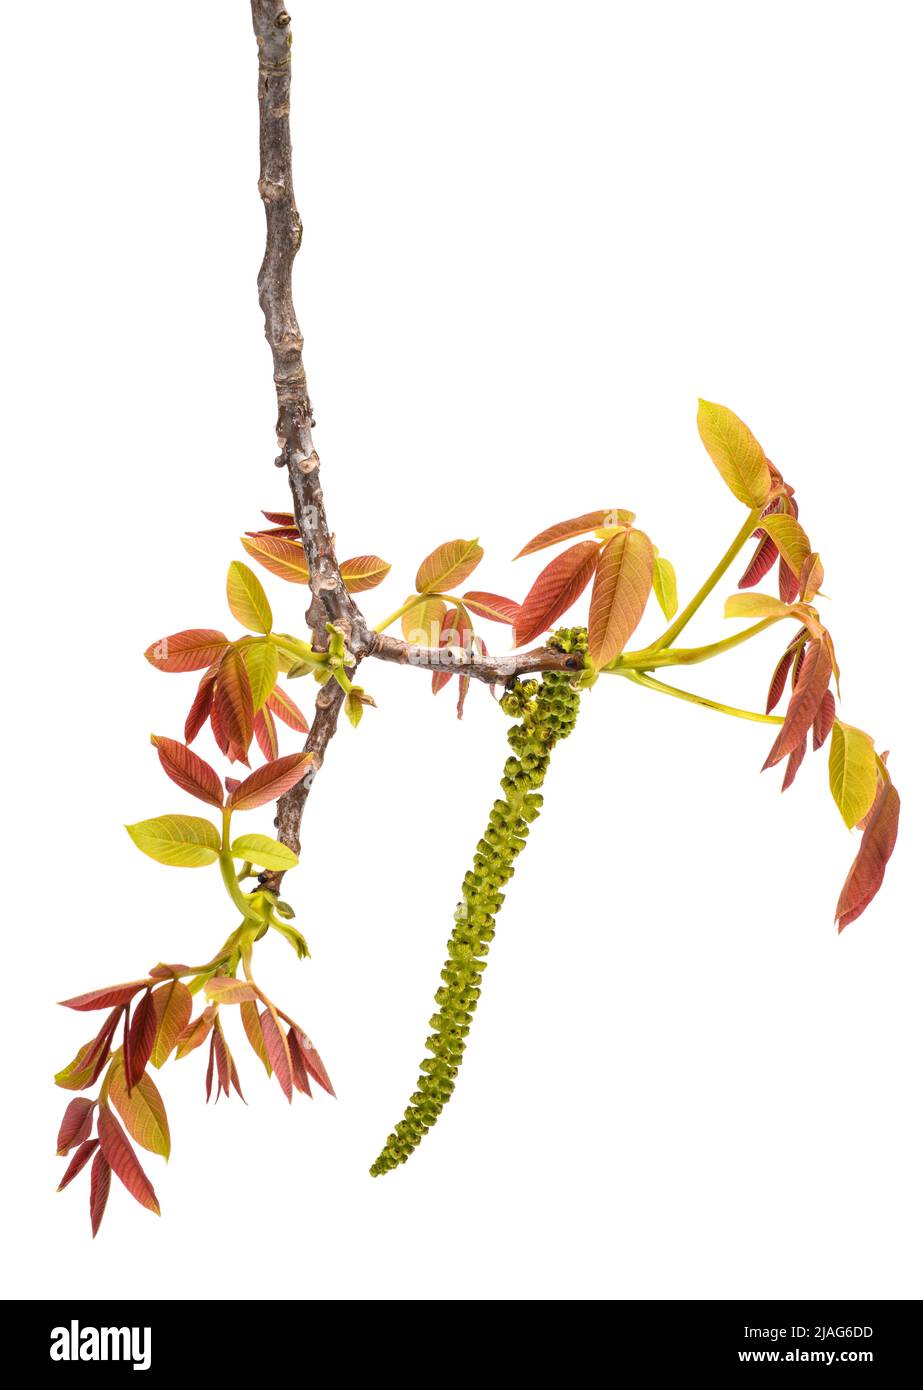 Walnut catkin and young leaves isolated on white Stock Photo